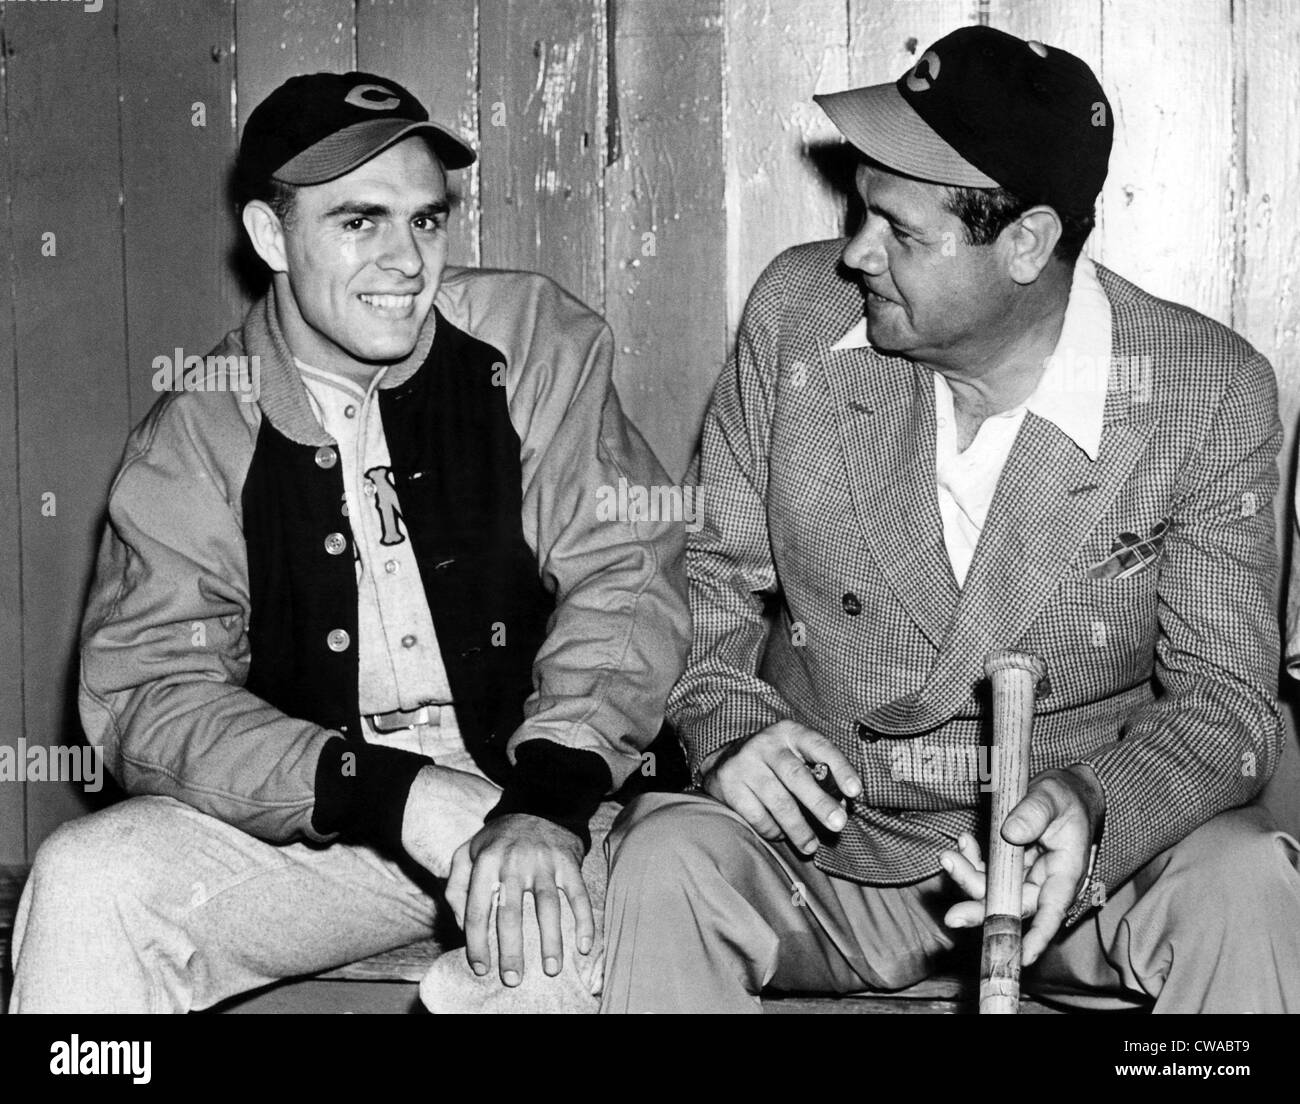 Johnny Vander Meer, Cincinnati Reds pitcher and Babe Ruth, June 15, 1938. Courtesy: CSU Archives/Everett Collection Stock Photo